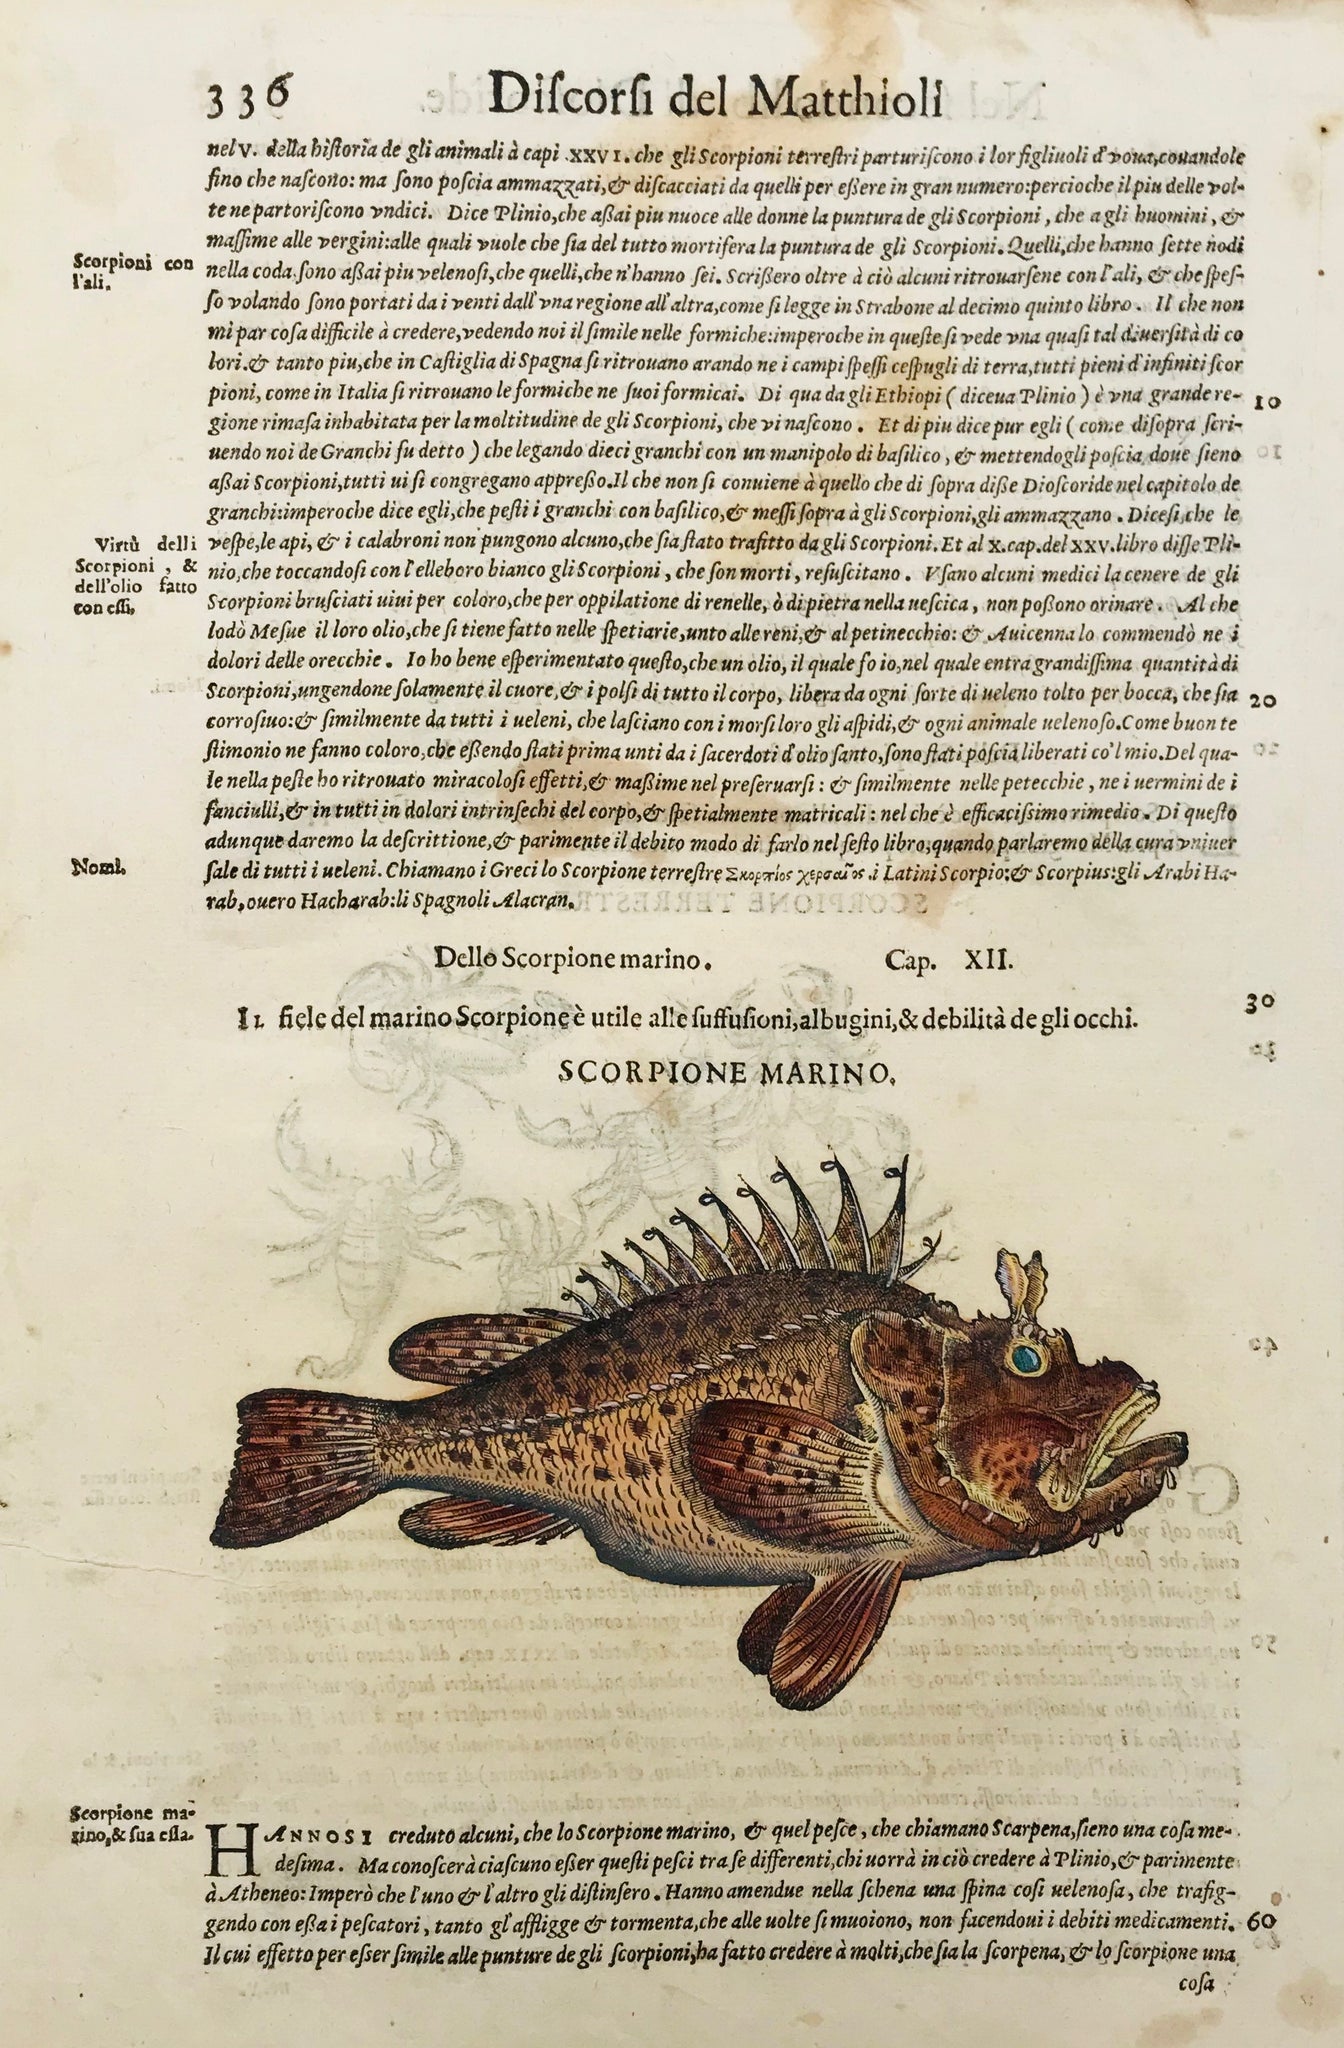 Scorpione Marino (Type of Stone fish)  Drago Marino (Stone Fish)  Woodcut by Pietro Andrea Mattioli (1500-1577). Published 1571. Reverse side is printed with an image of land scorpions plus text in Italian.